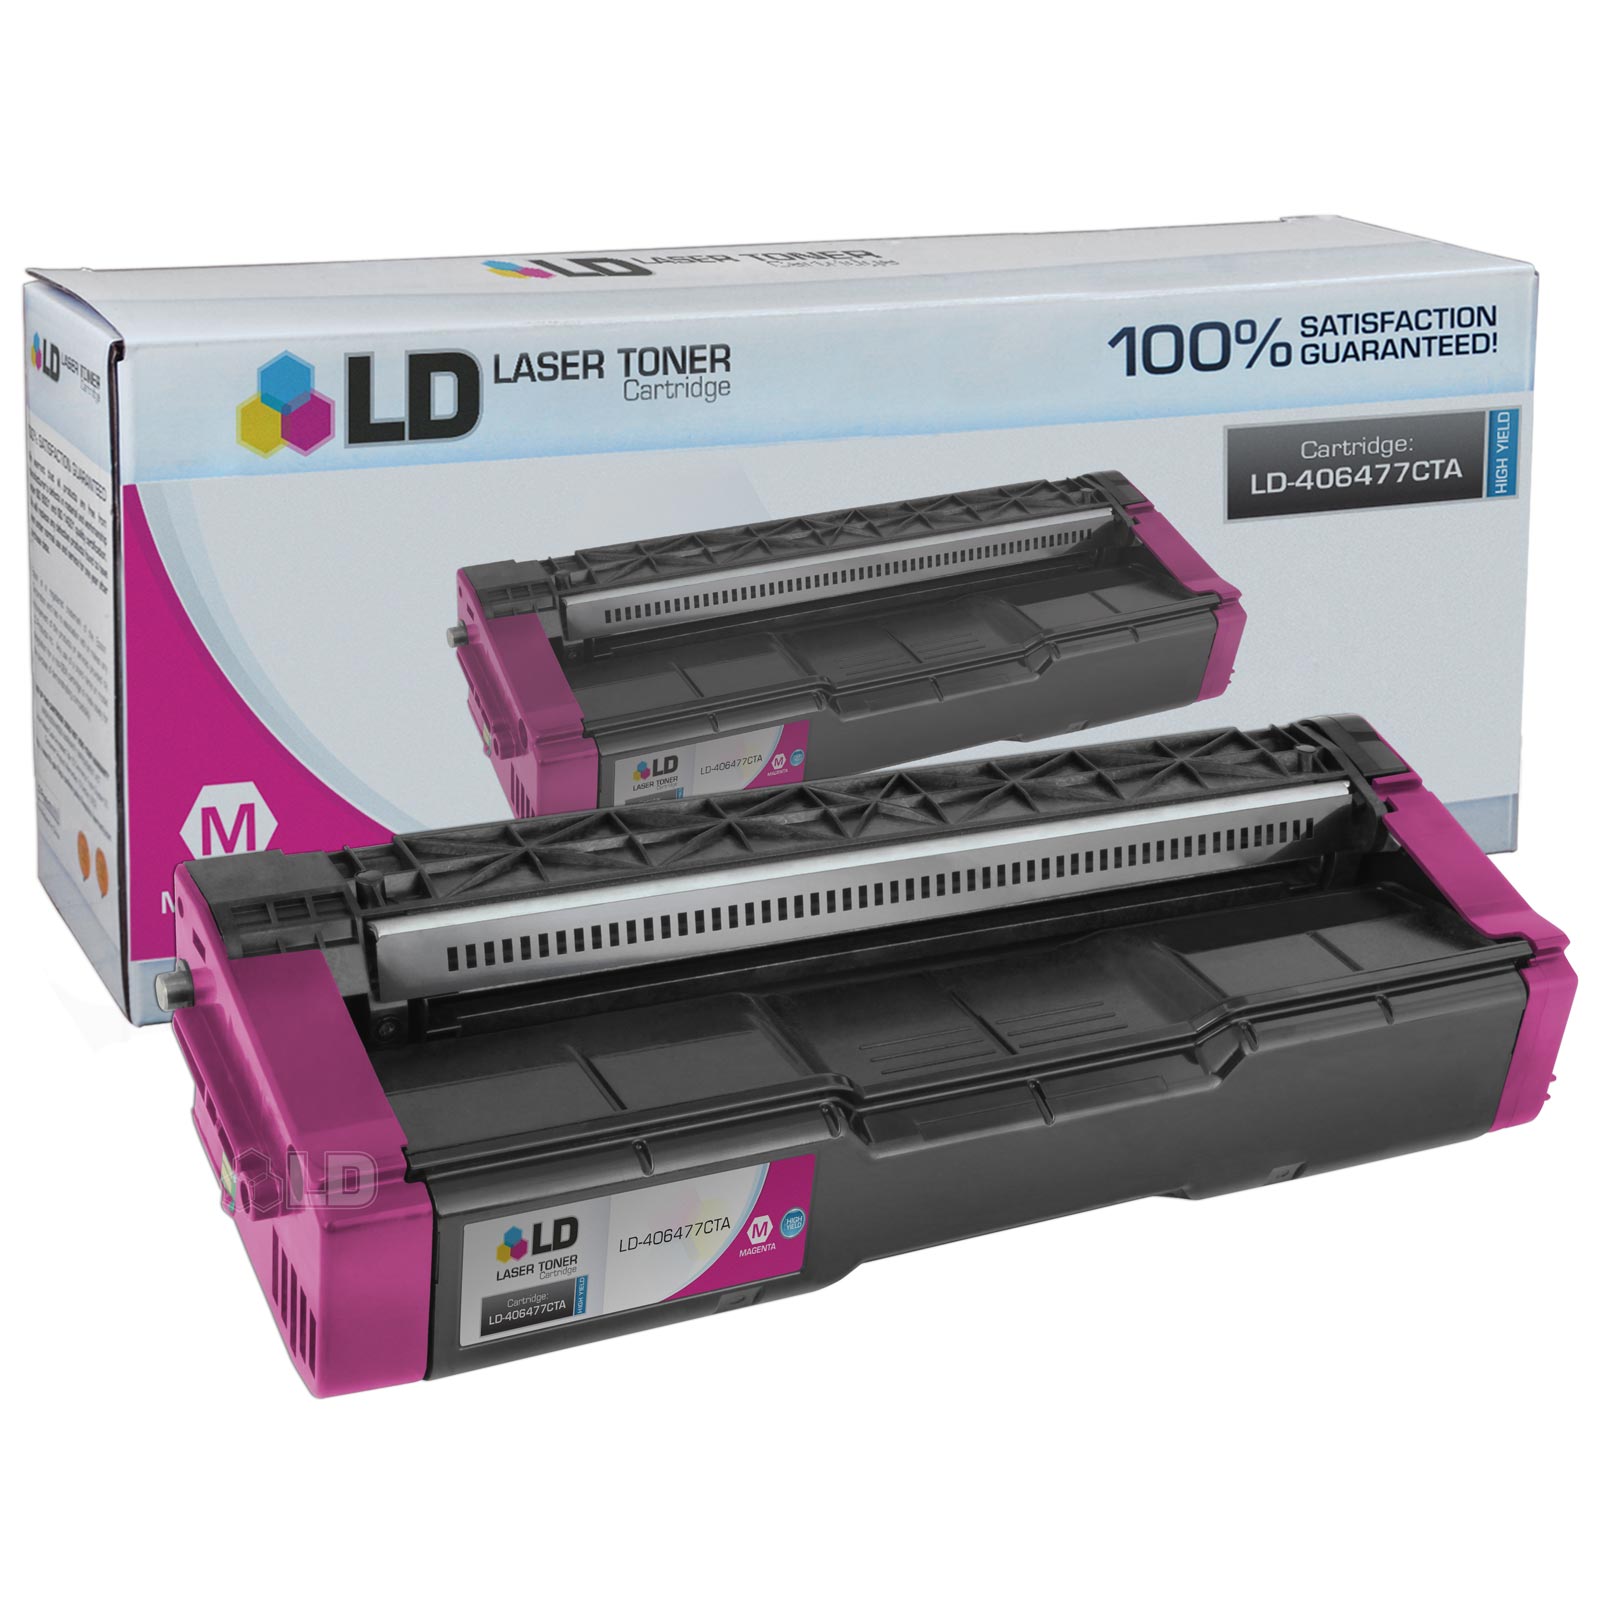 LD © Compatible Replacement for Ricoh 406477 High Yield Magenta Laser Toner Cartridge for use in Ricoh Aficio SP C231N, SP C232DN, SP C242DN, SP C242SF, and SP C320DN Printers - image 2 of 2